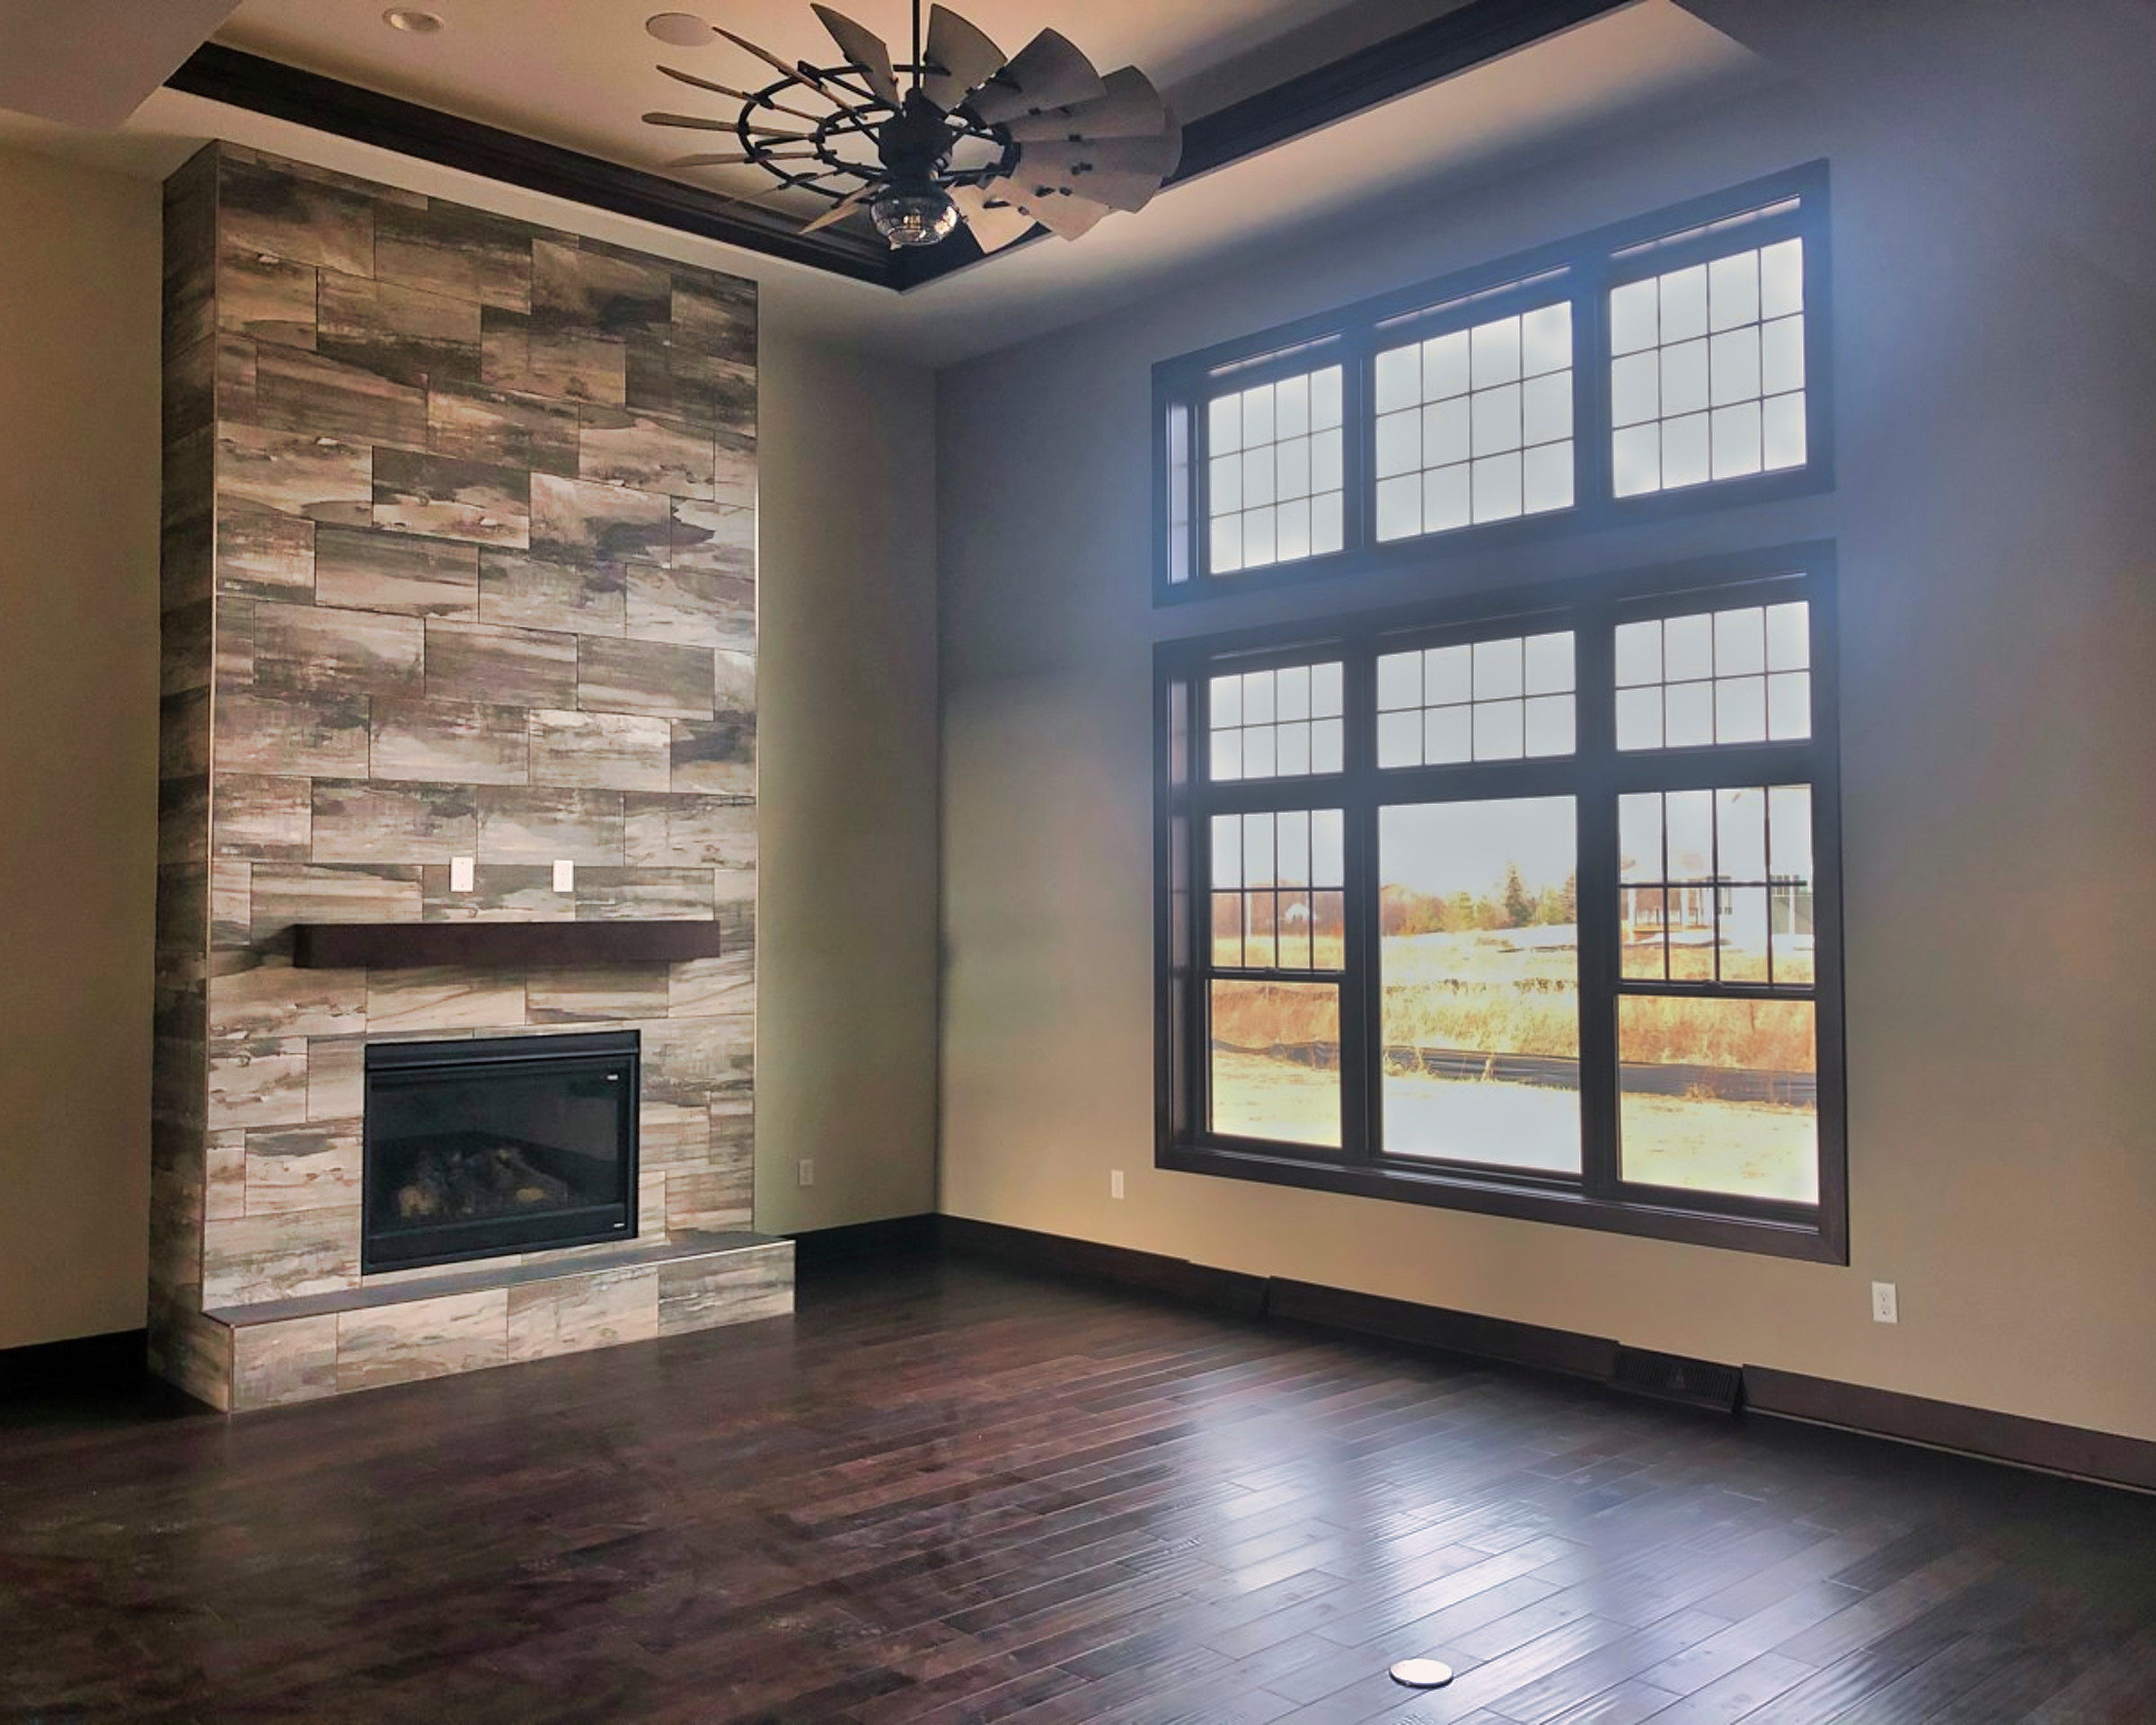 Mequon Ranch - Great Room fireplace and windows